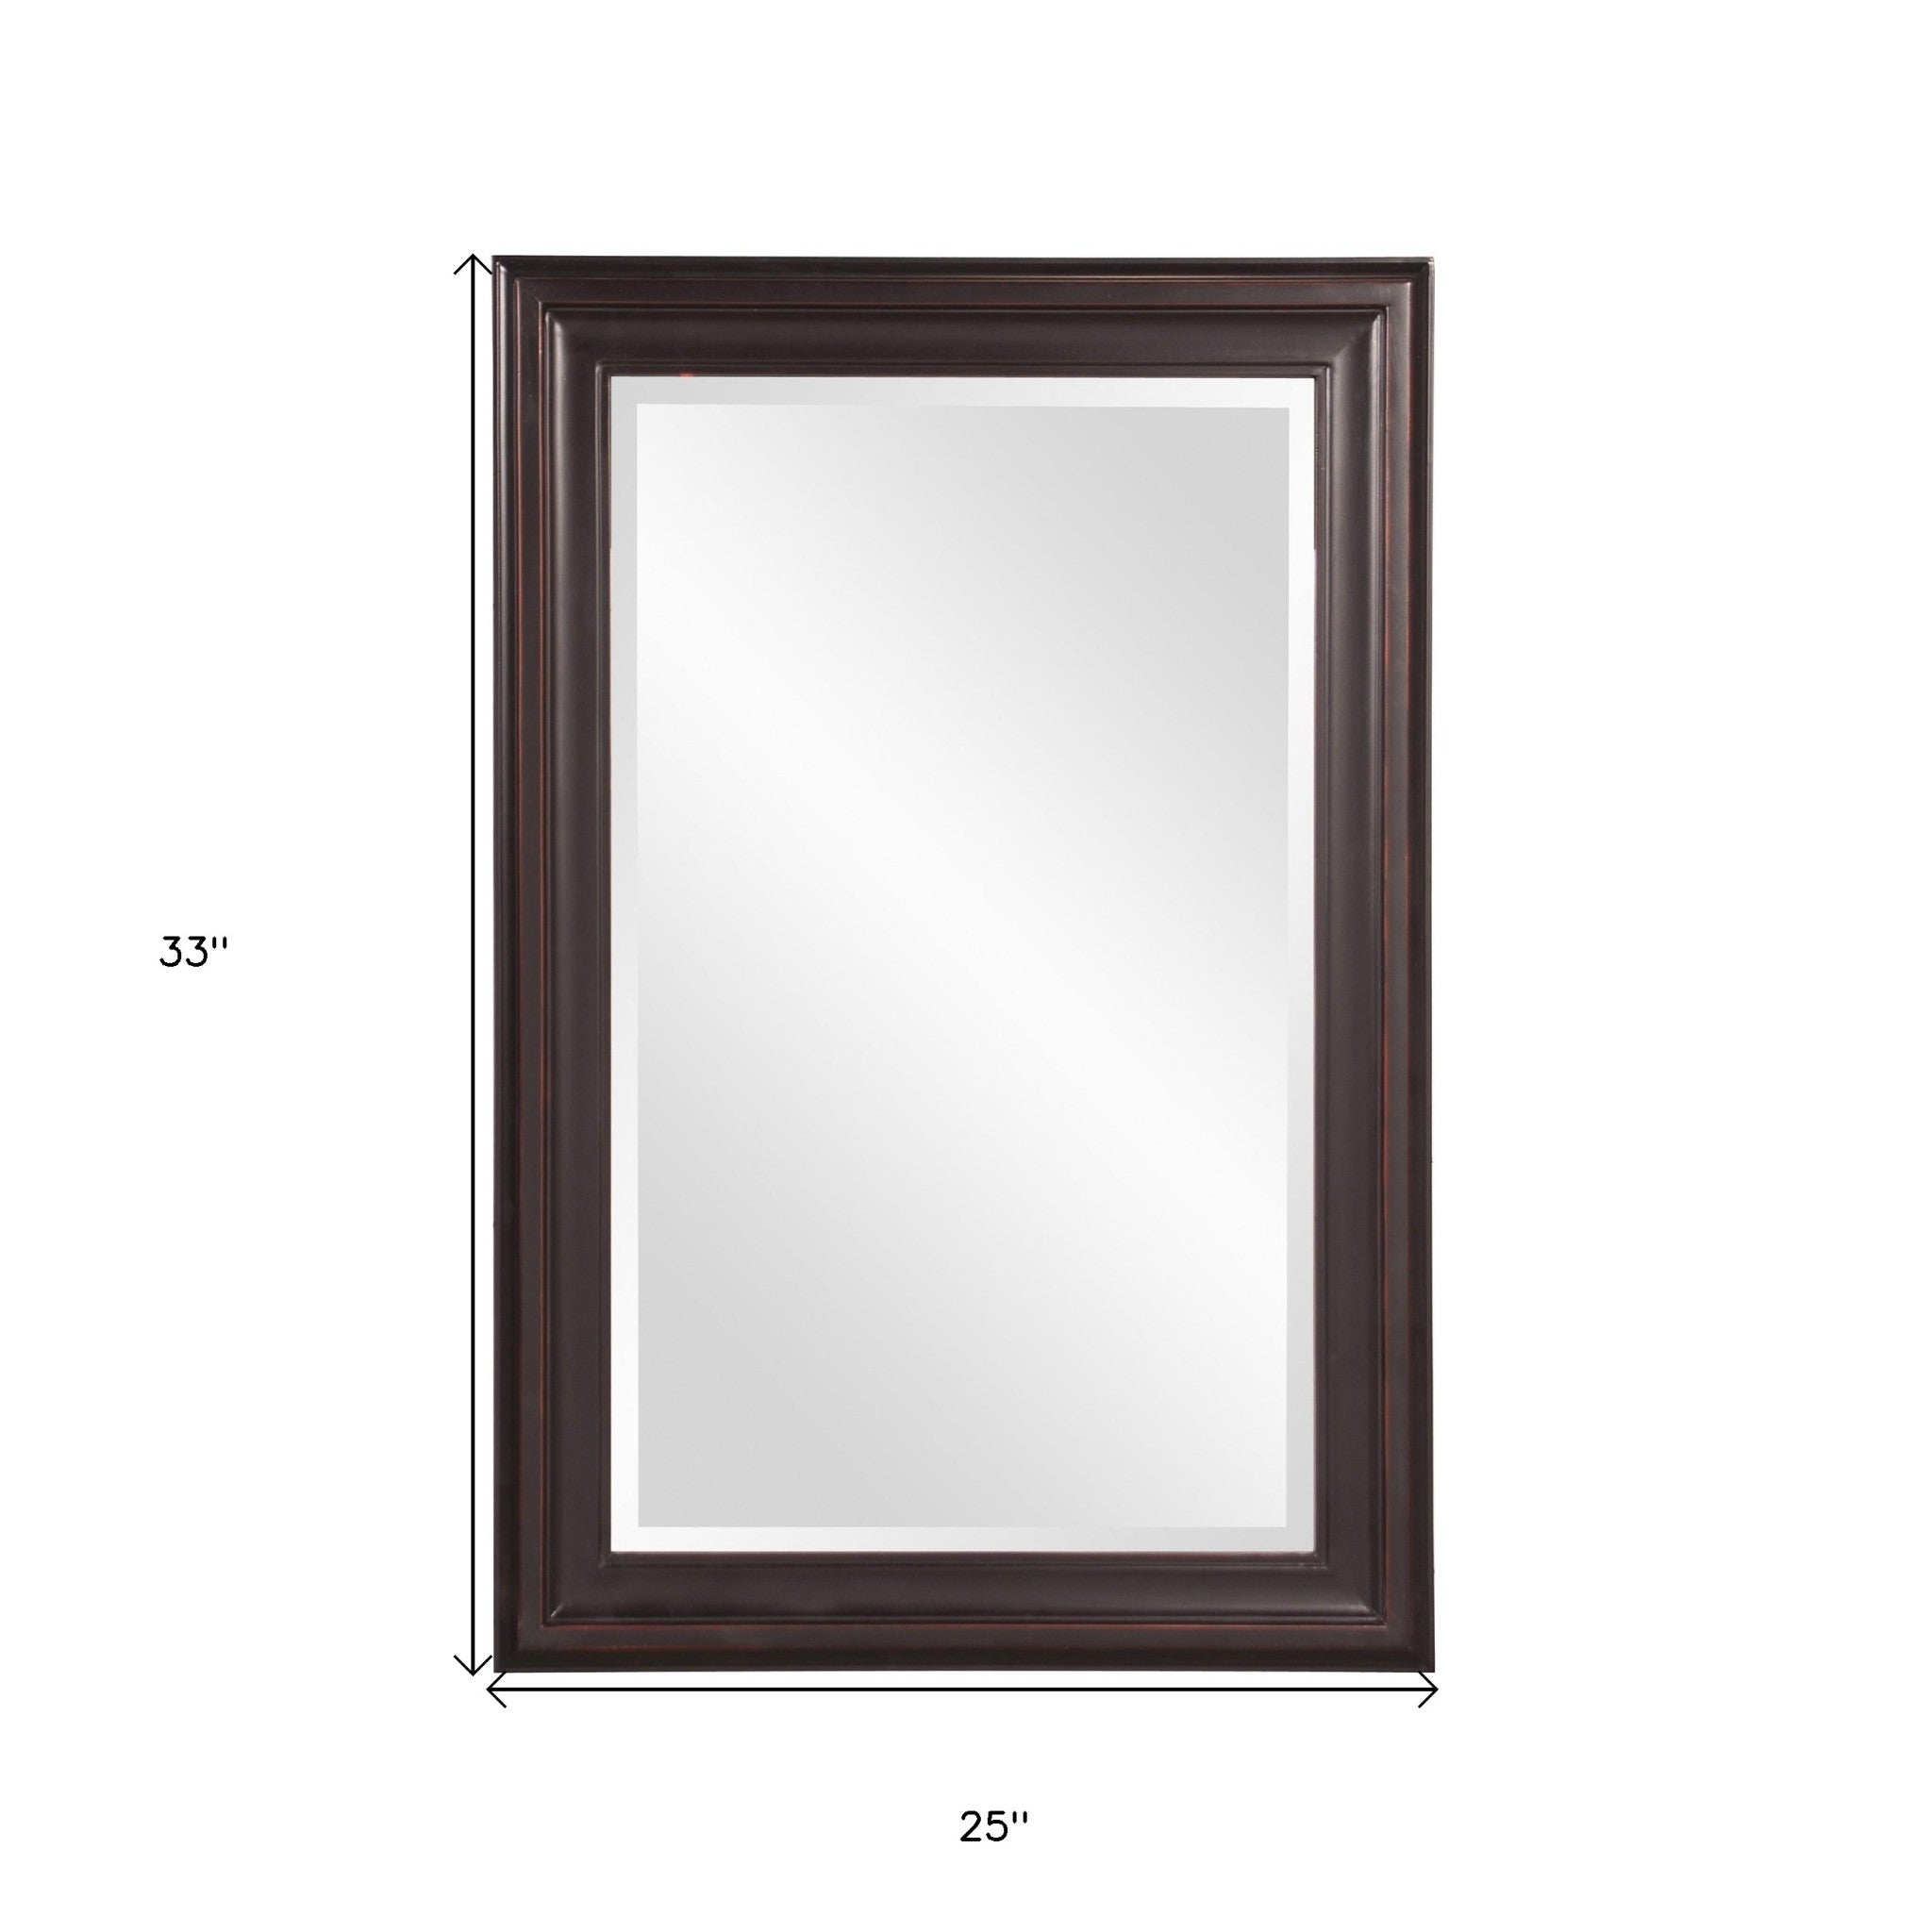 Rectangle Oil Rubbed Bronze Finish Mirror With Wooden Bronze Frame